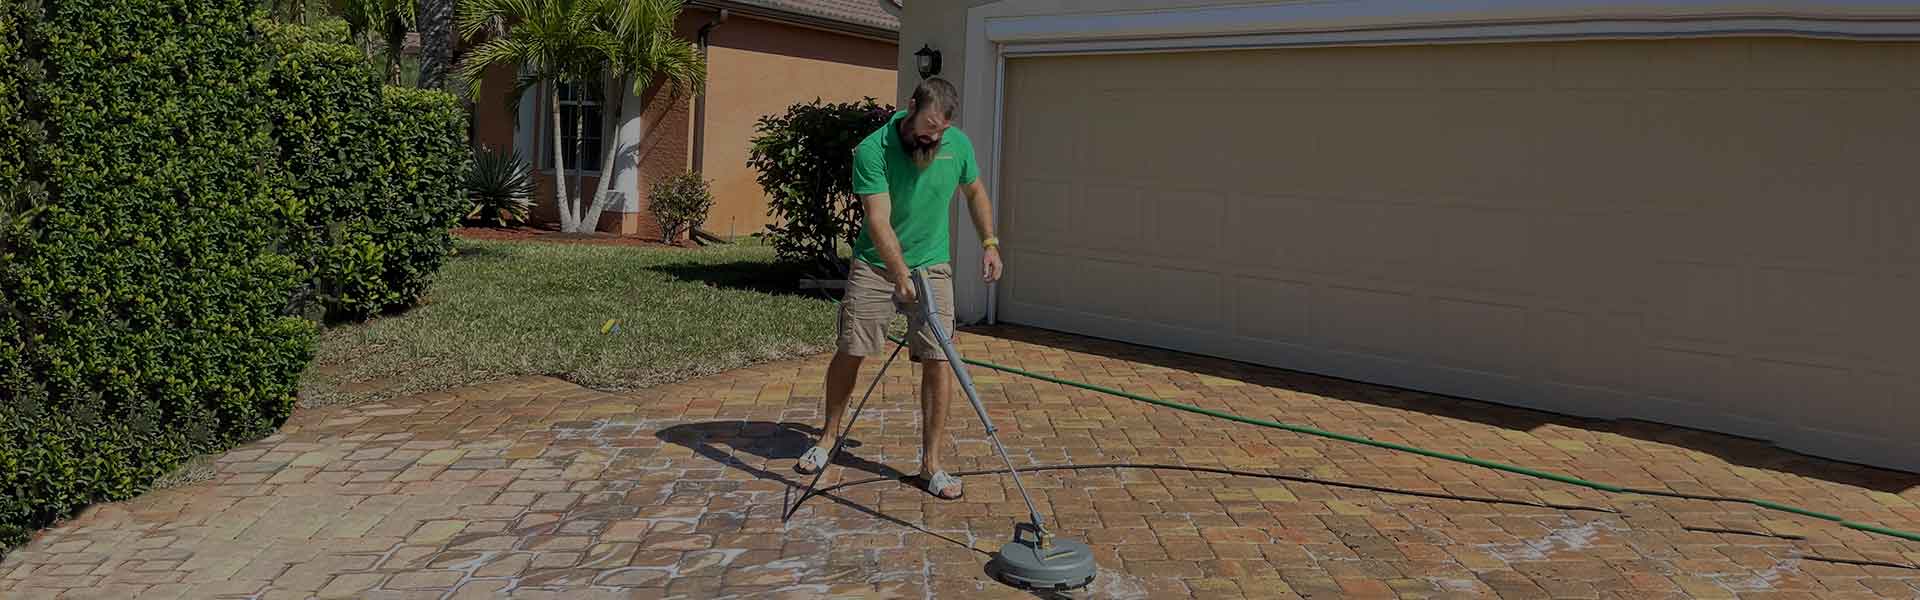 Pressure washing-cleaning service